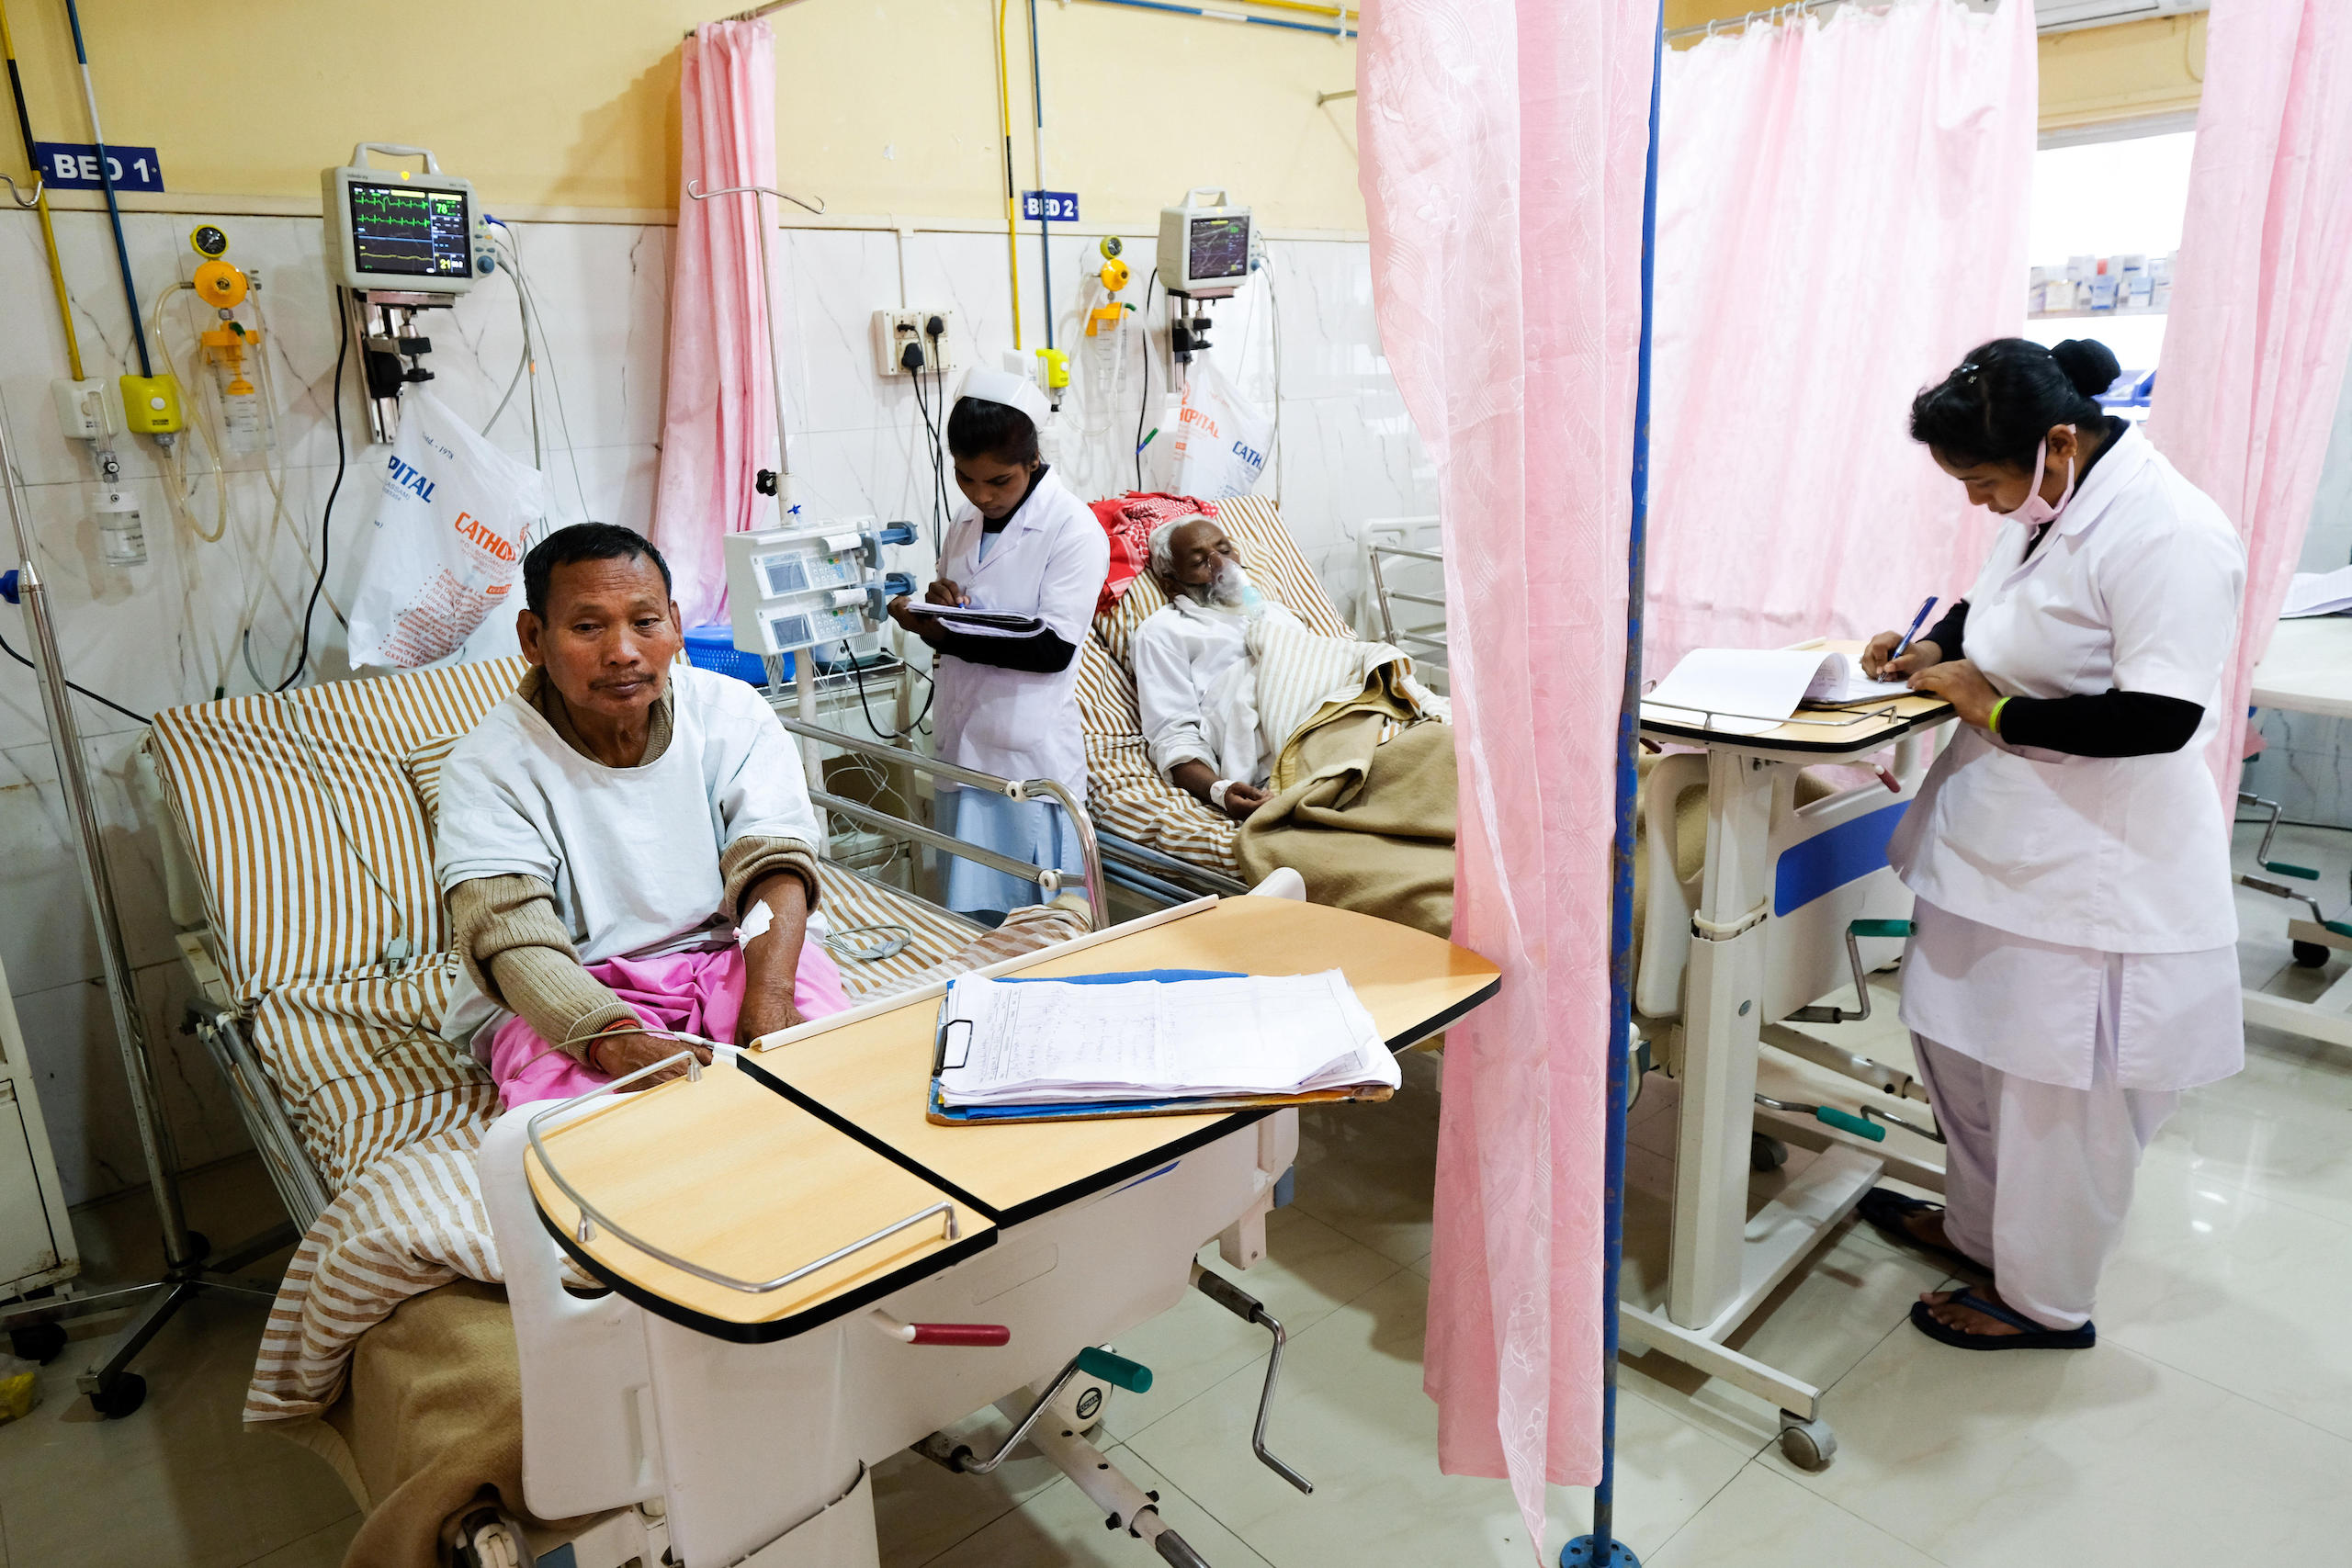 <p>A hospital ward in Assam, northern India. Hospitals and healthcare centres in the Himalayas are facing disruption due to water shortages, exacerbated by climate change and construction. (Image: Friedrich Stark / Alamy)</p>